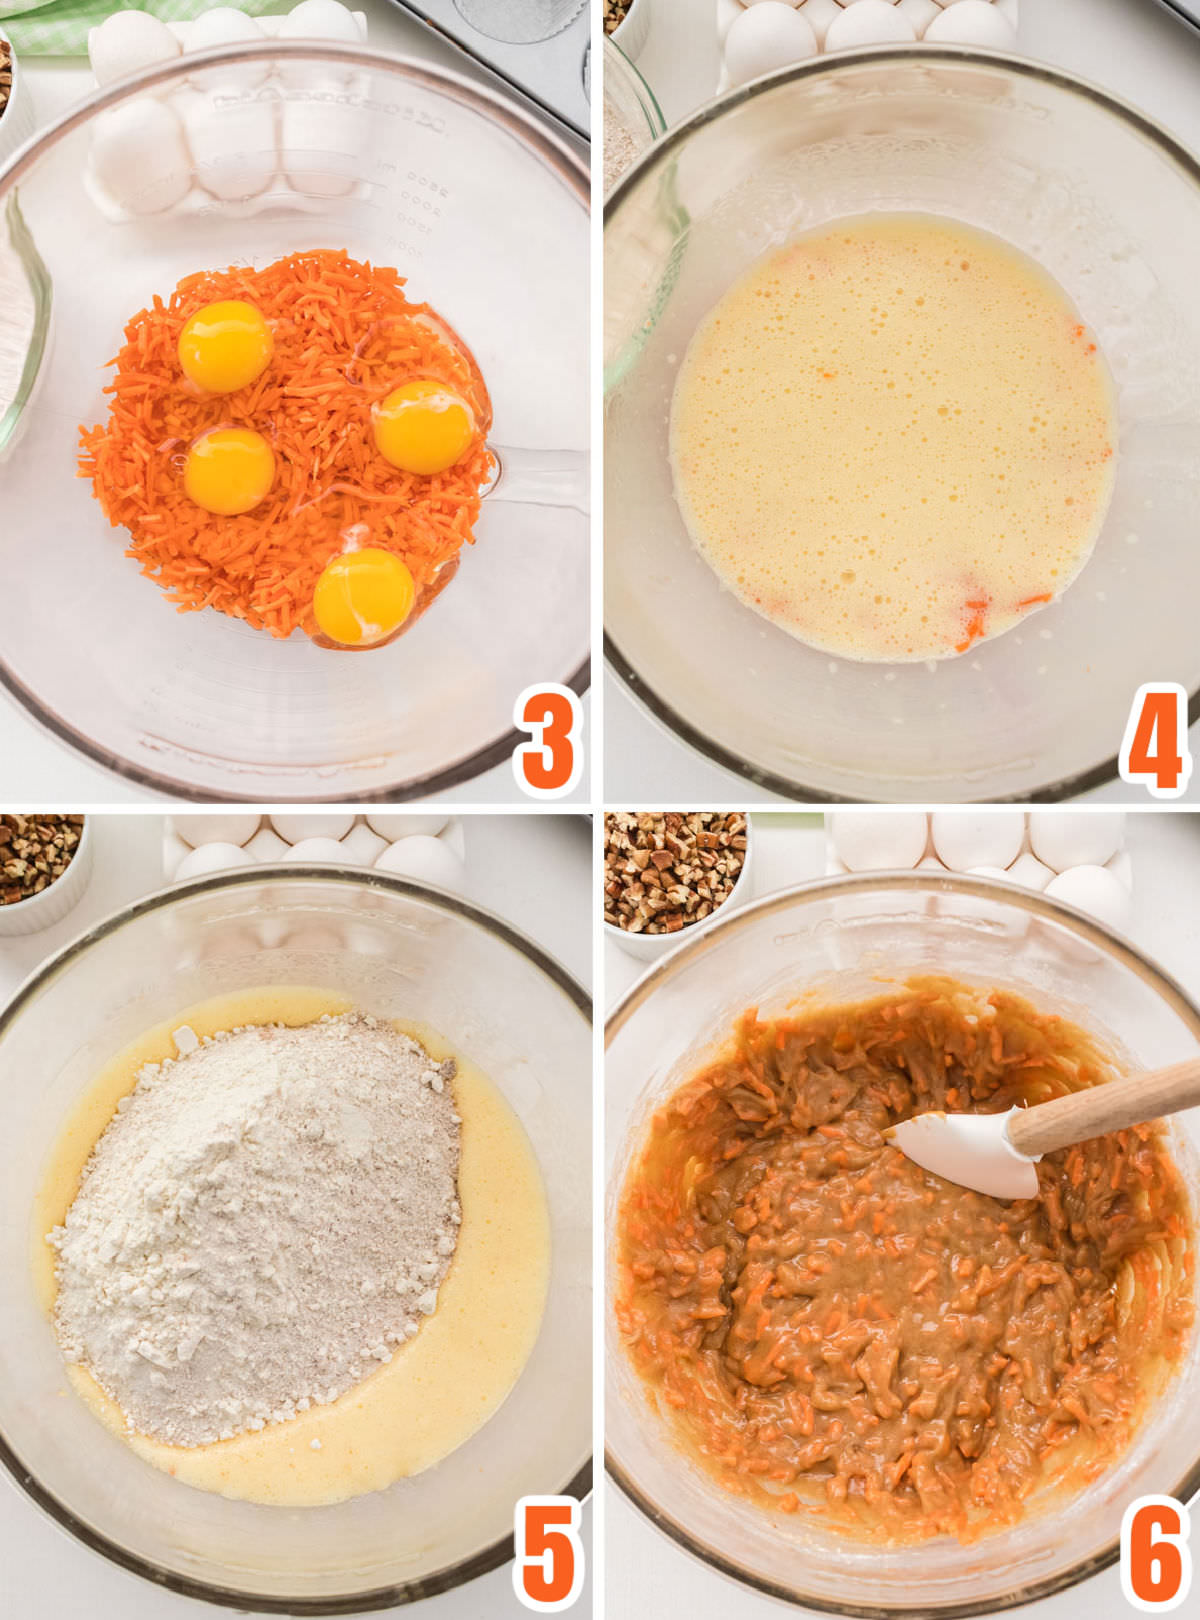 Collage image showing the steps for making the cupcake batter.